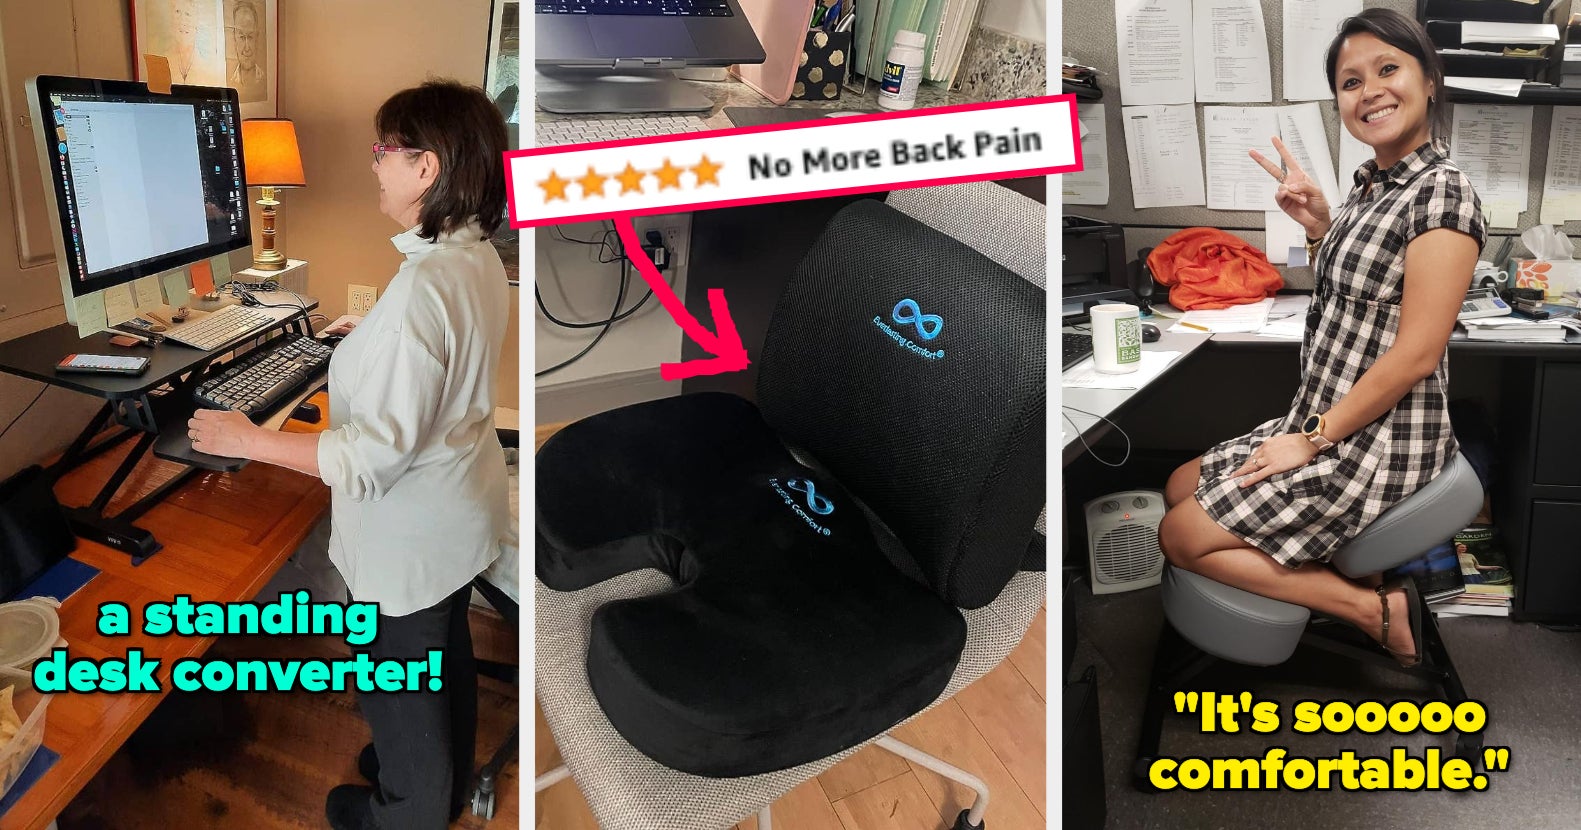 H. Gaming PC Chair Cushion, Gel Office Seat Cushion for Long Sitting,  Upgraded Desk Butt Pillow for Computer Gamer Chairs, Tailbone Pain and  Coccyx